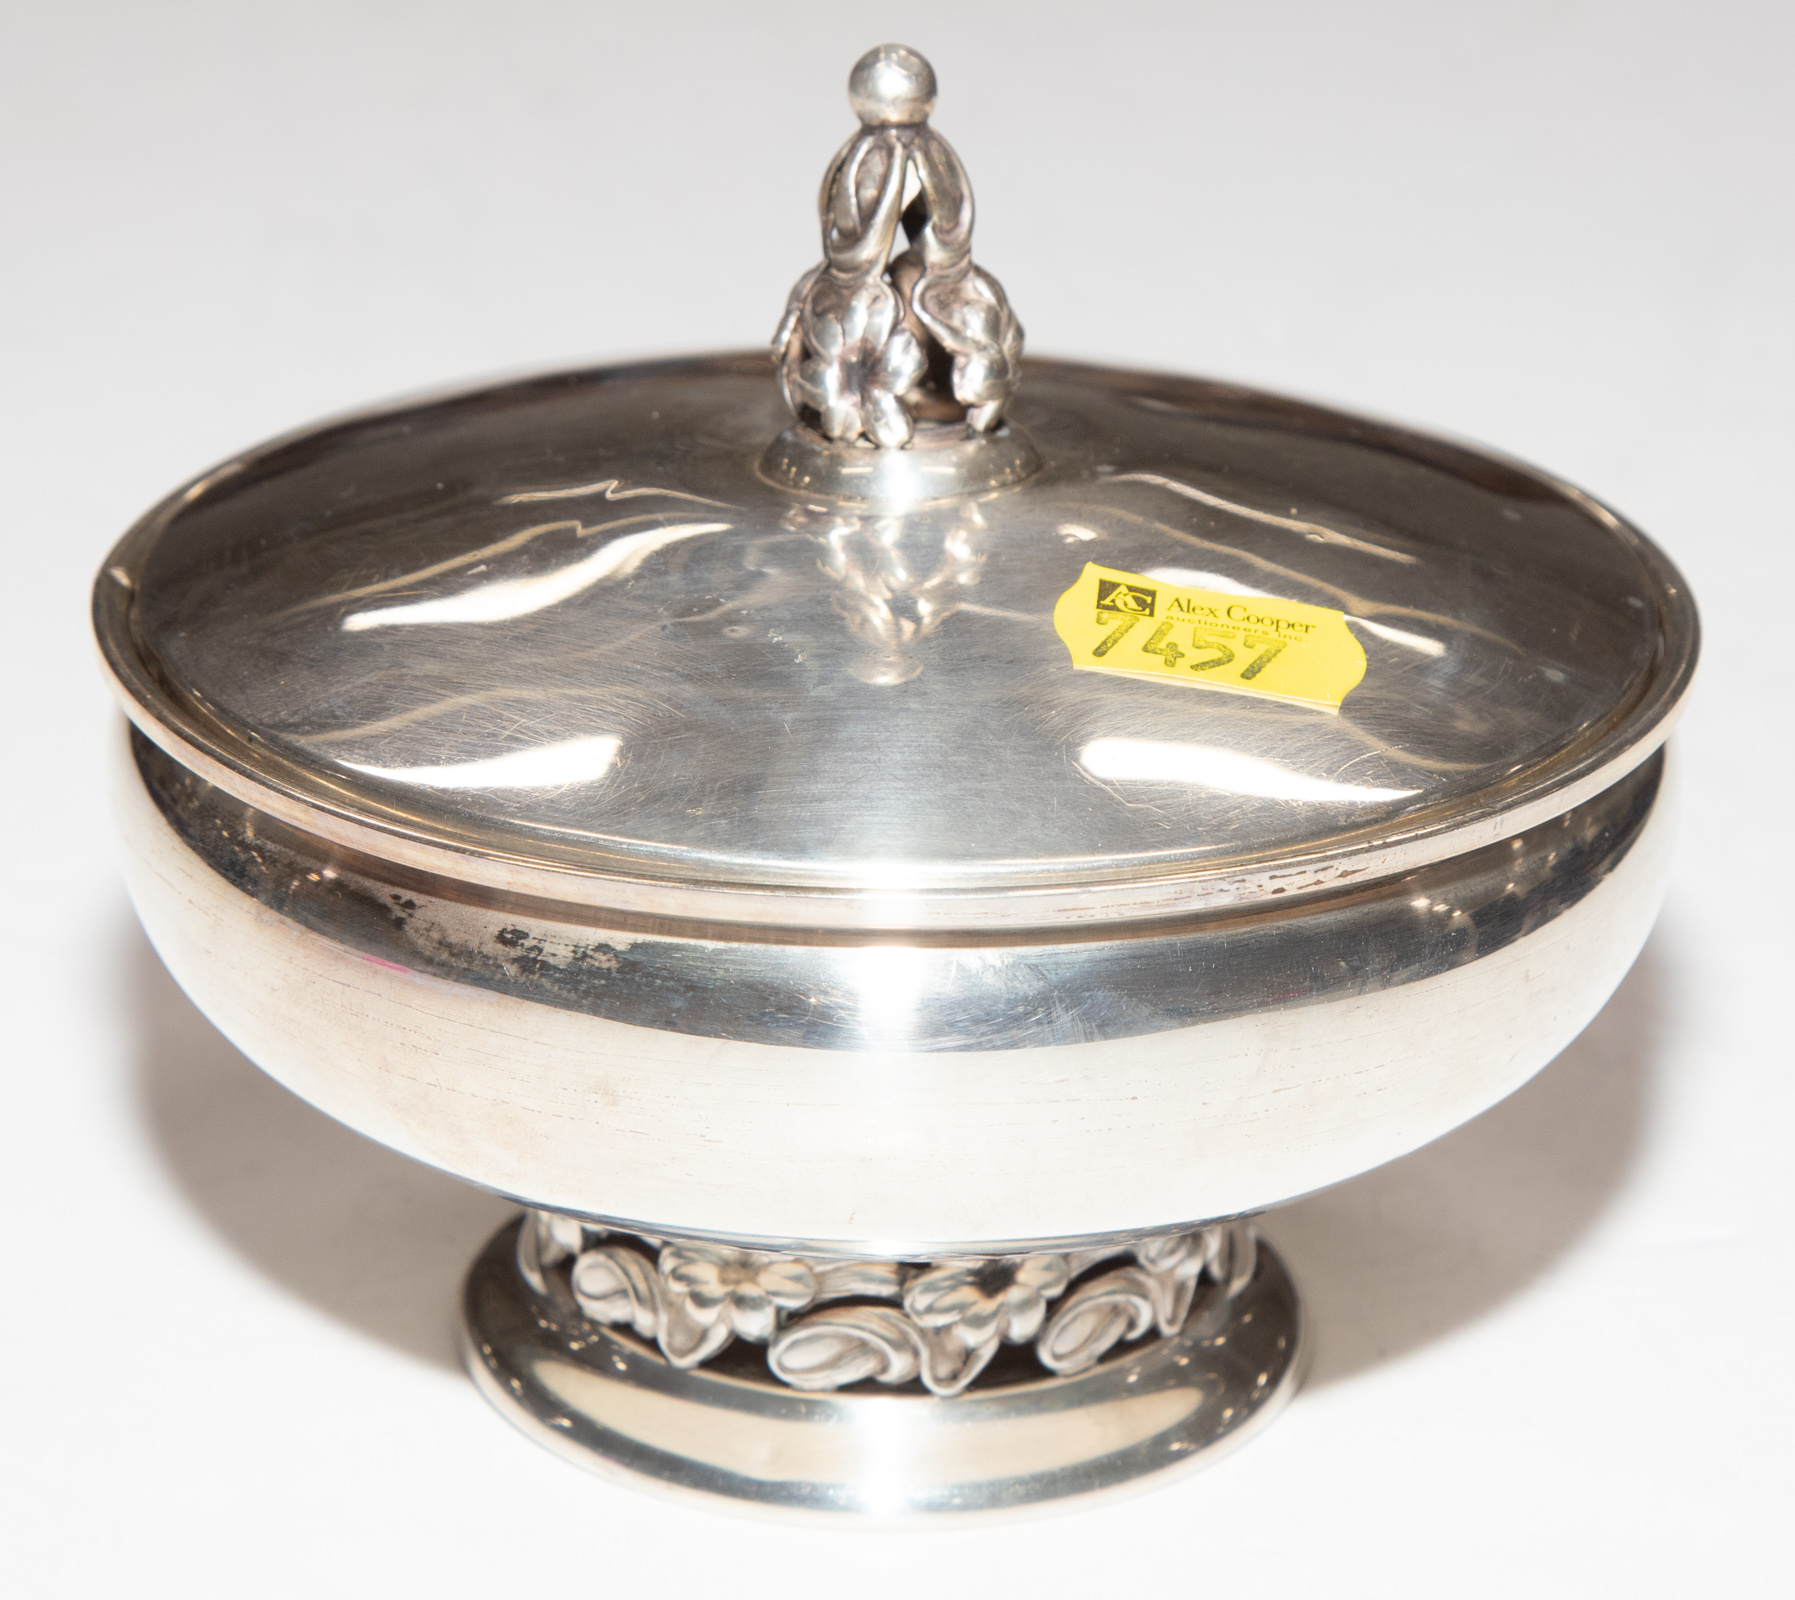 MUECK CAREY STERLING COVERED DISH 289751